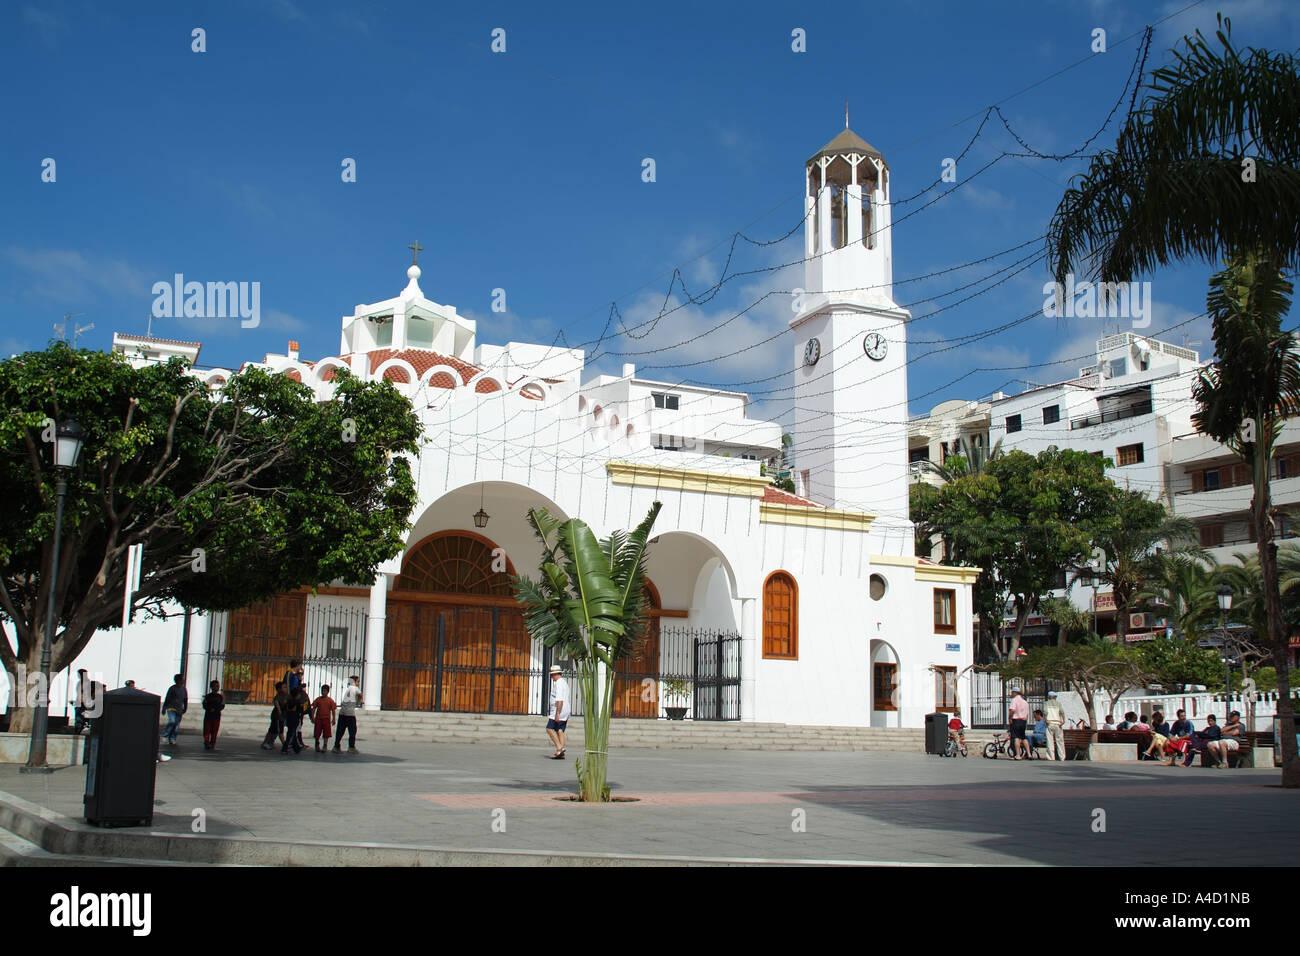 Town Square and parish church at Los Cristianos a popular seaside resort in southern Tenerife Canary Islands Spain Stock Photo